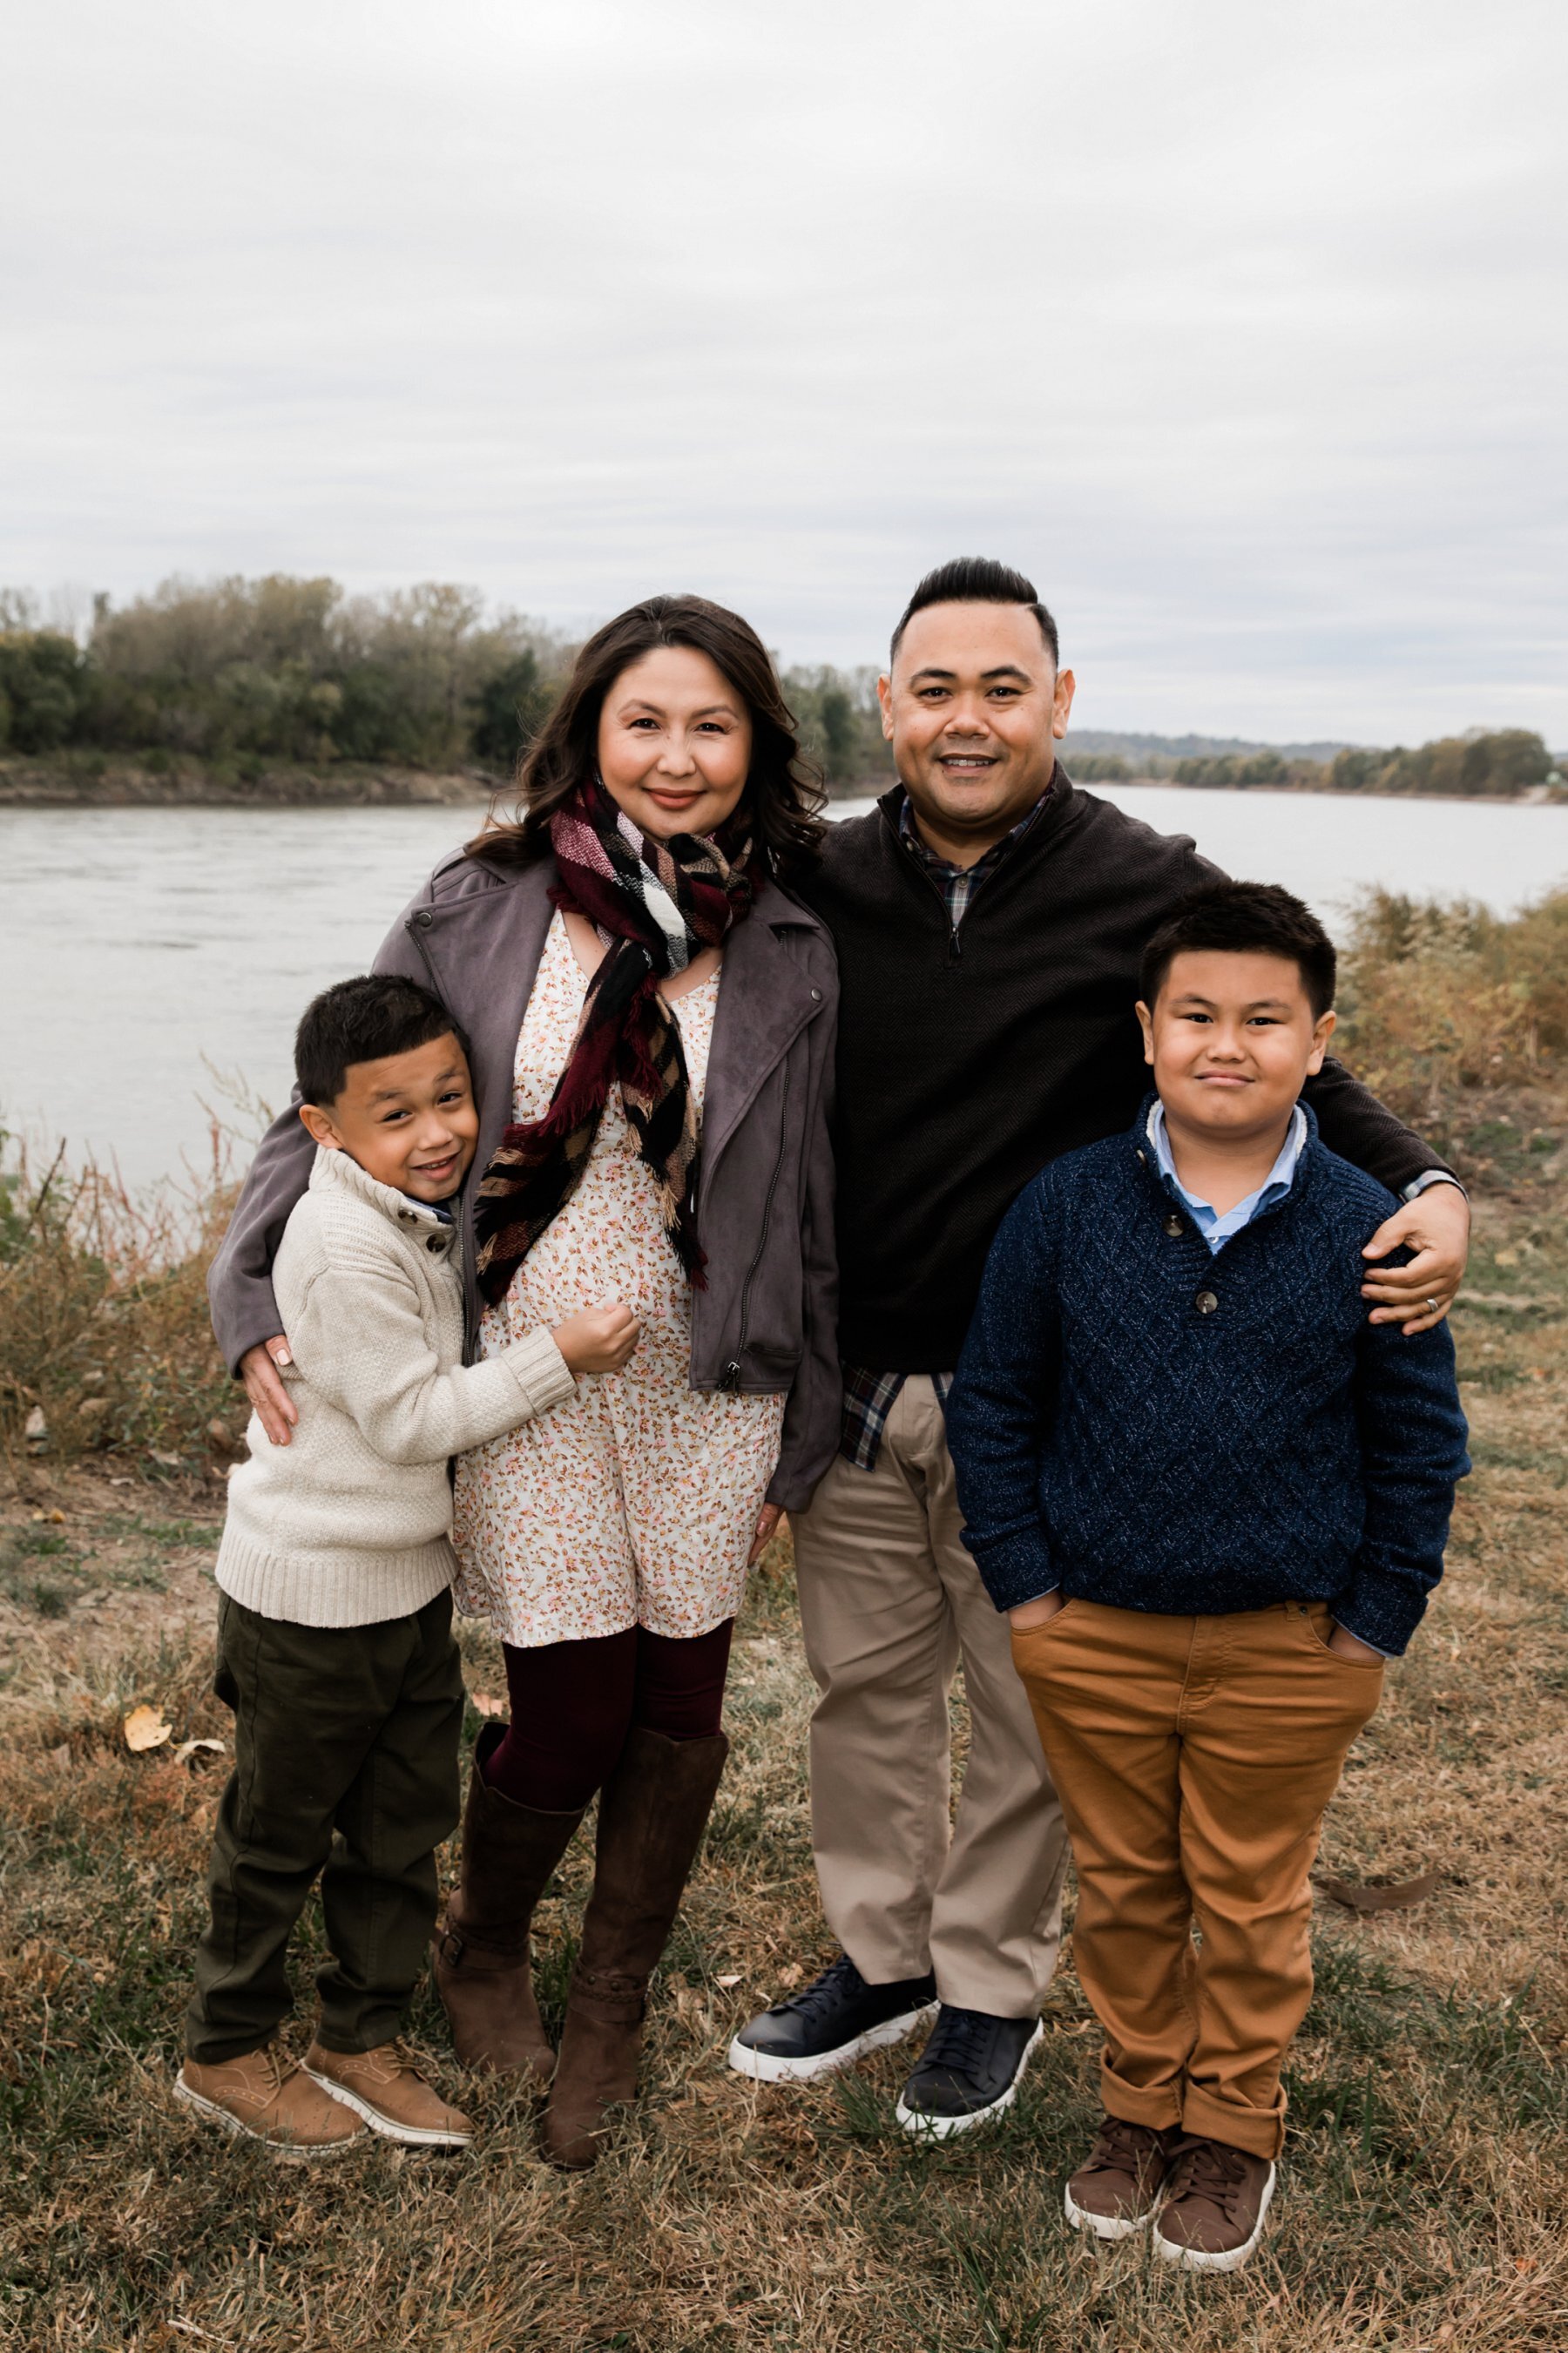 Fall Family Photography by River in Kansas City 3